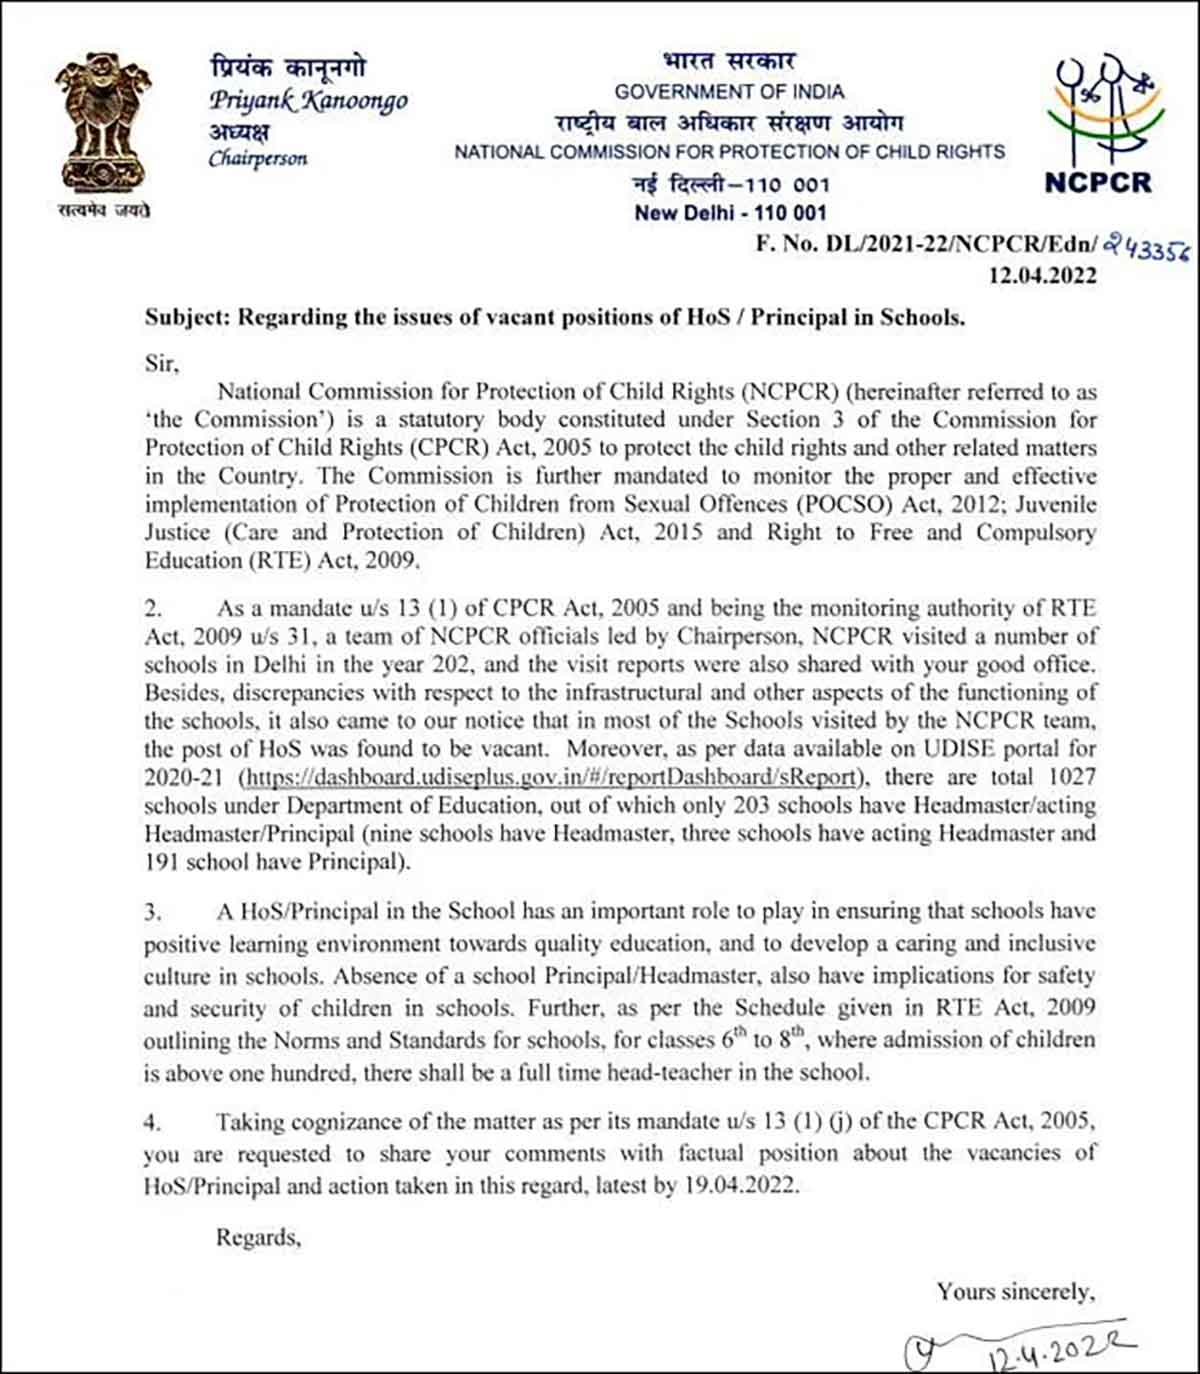 NCPCR has asked the chief secretary to share the factual position about the vacancies of Principal in Govt Schools